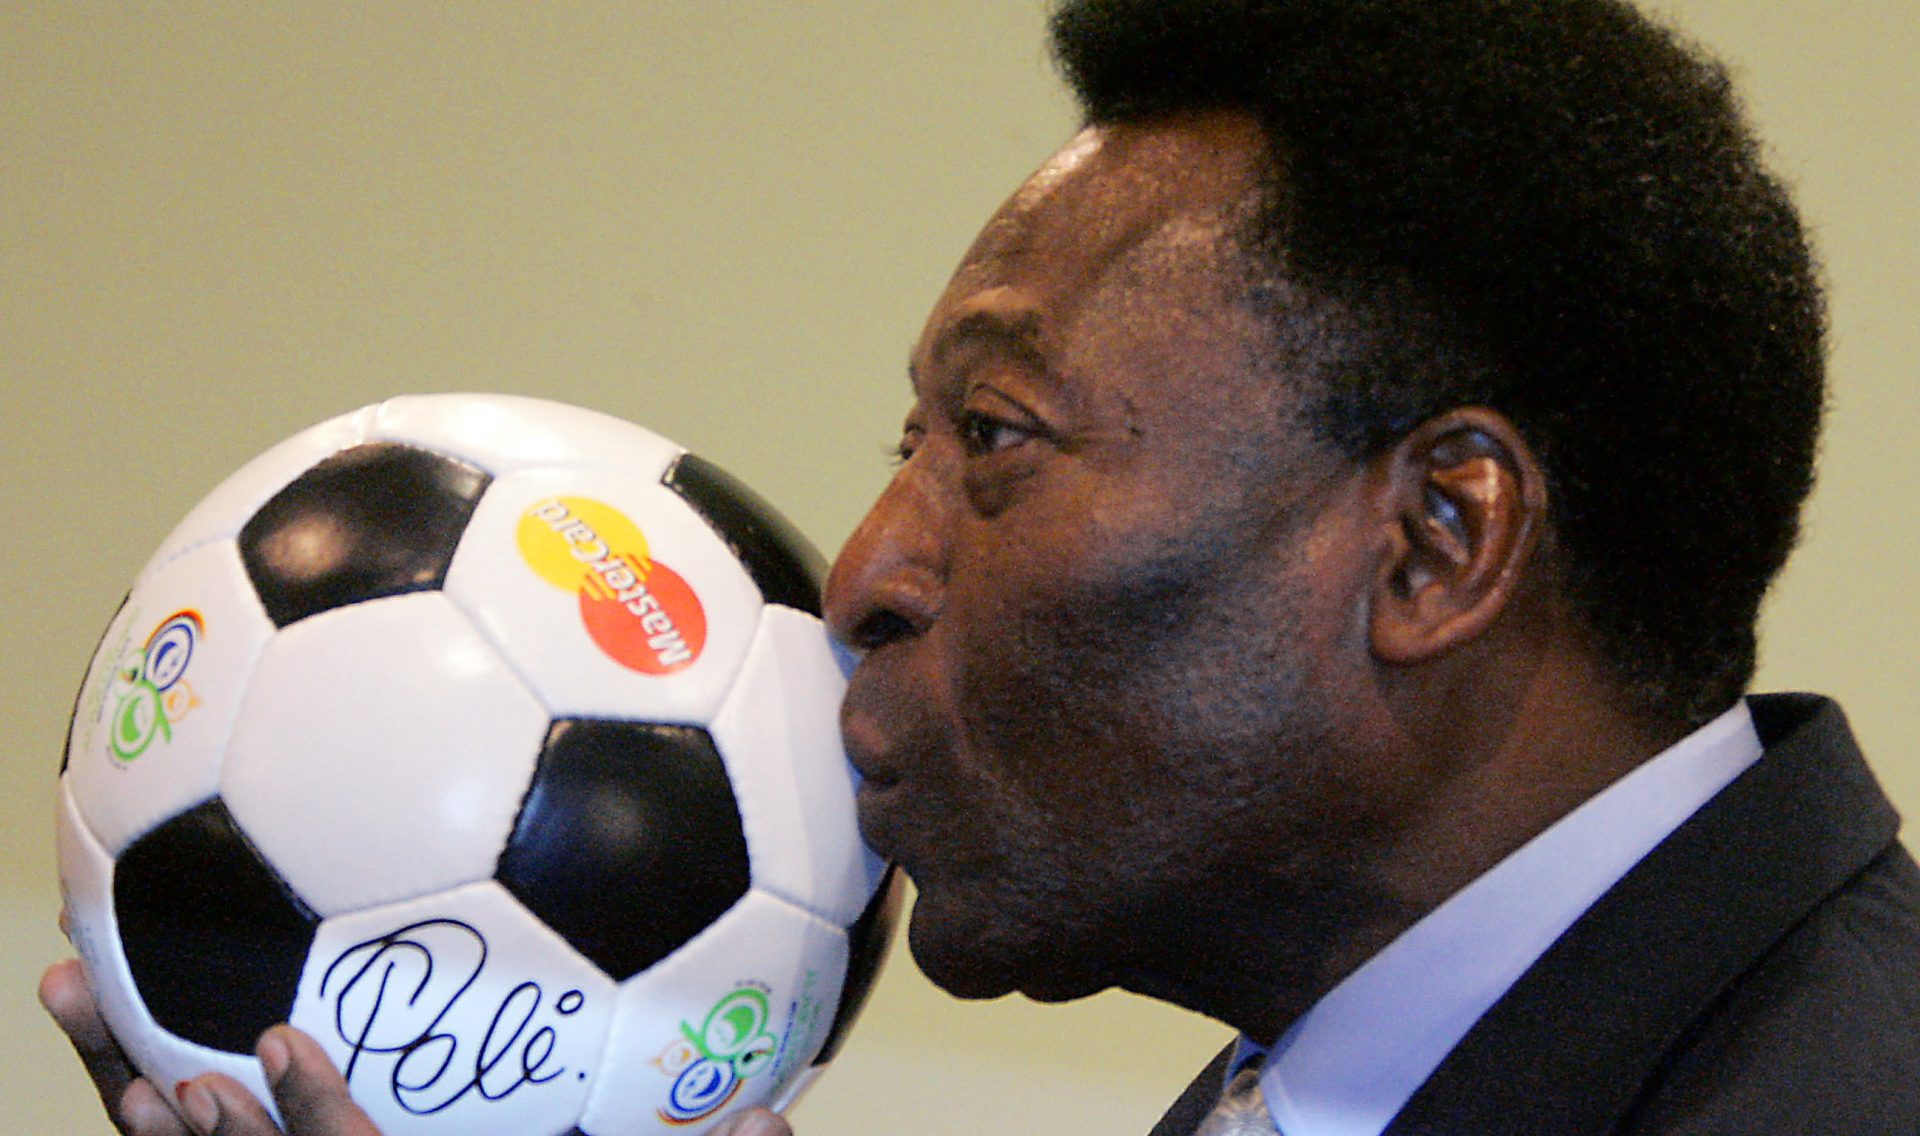 FILED - 08 December 2005, Saxony, Leipzig: Brazilian soccer legend Pele kisses a soccer ball at a press conference during the German premiere of the autobiographical film "Pele forever." Brazilian soccer legend Pele has died at the age of 82. Photo: Michael Hanschke/dpa